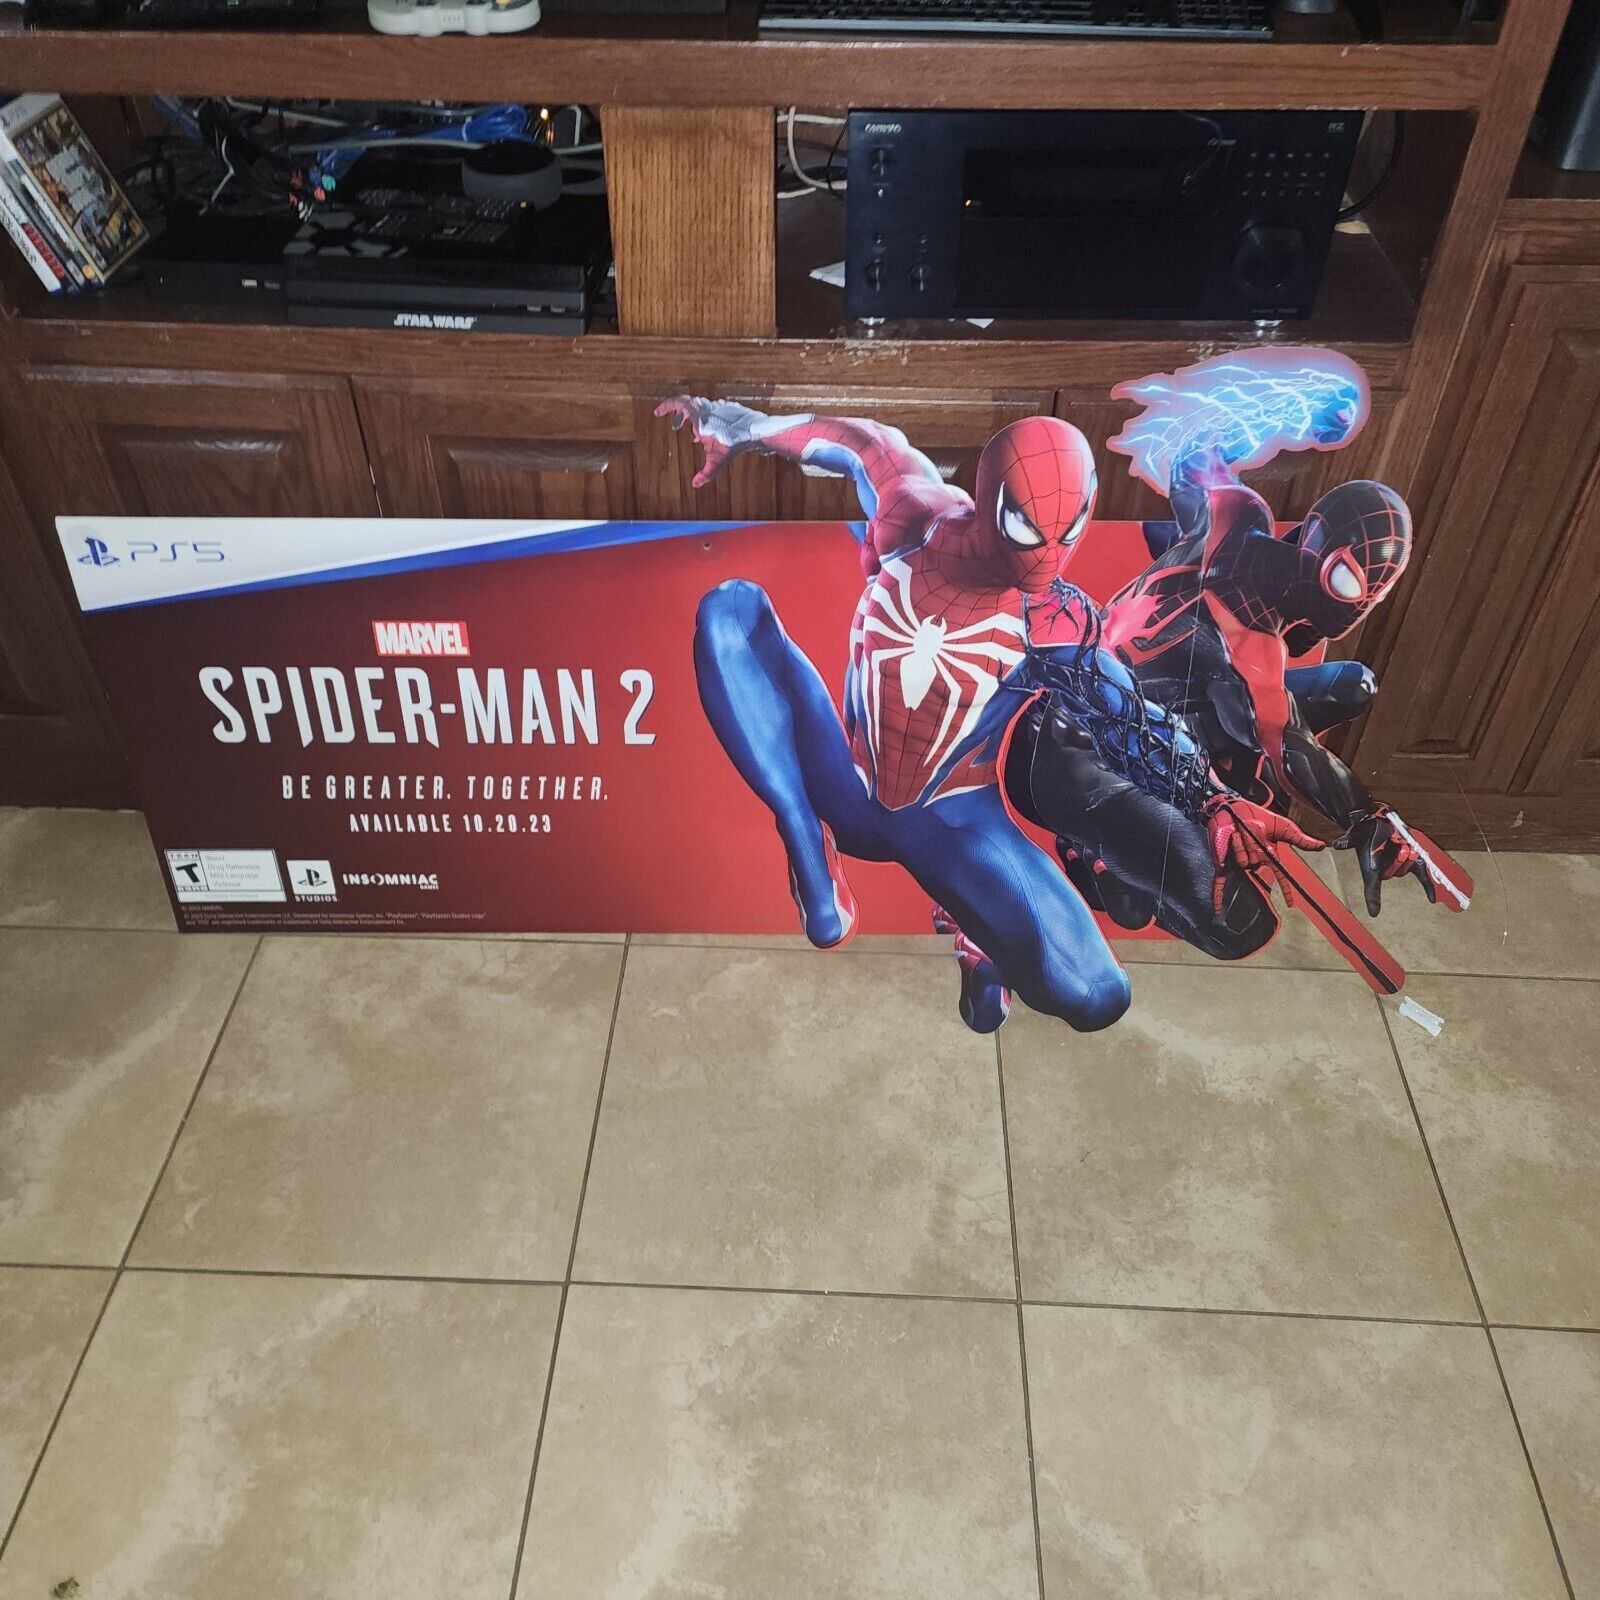 Spiderman 2 PS5 Release GameStop Promotional 3D Hanging Sign Poster